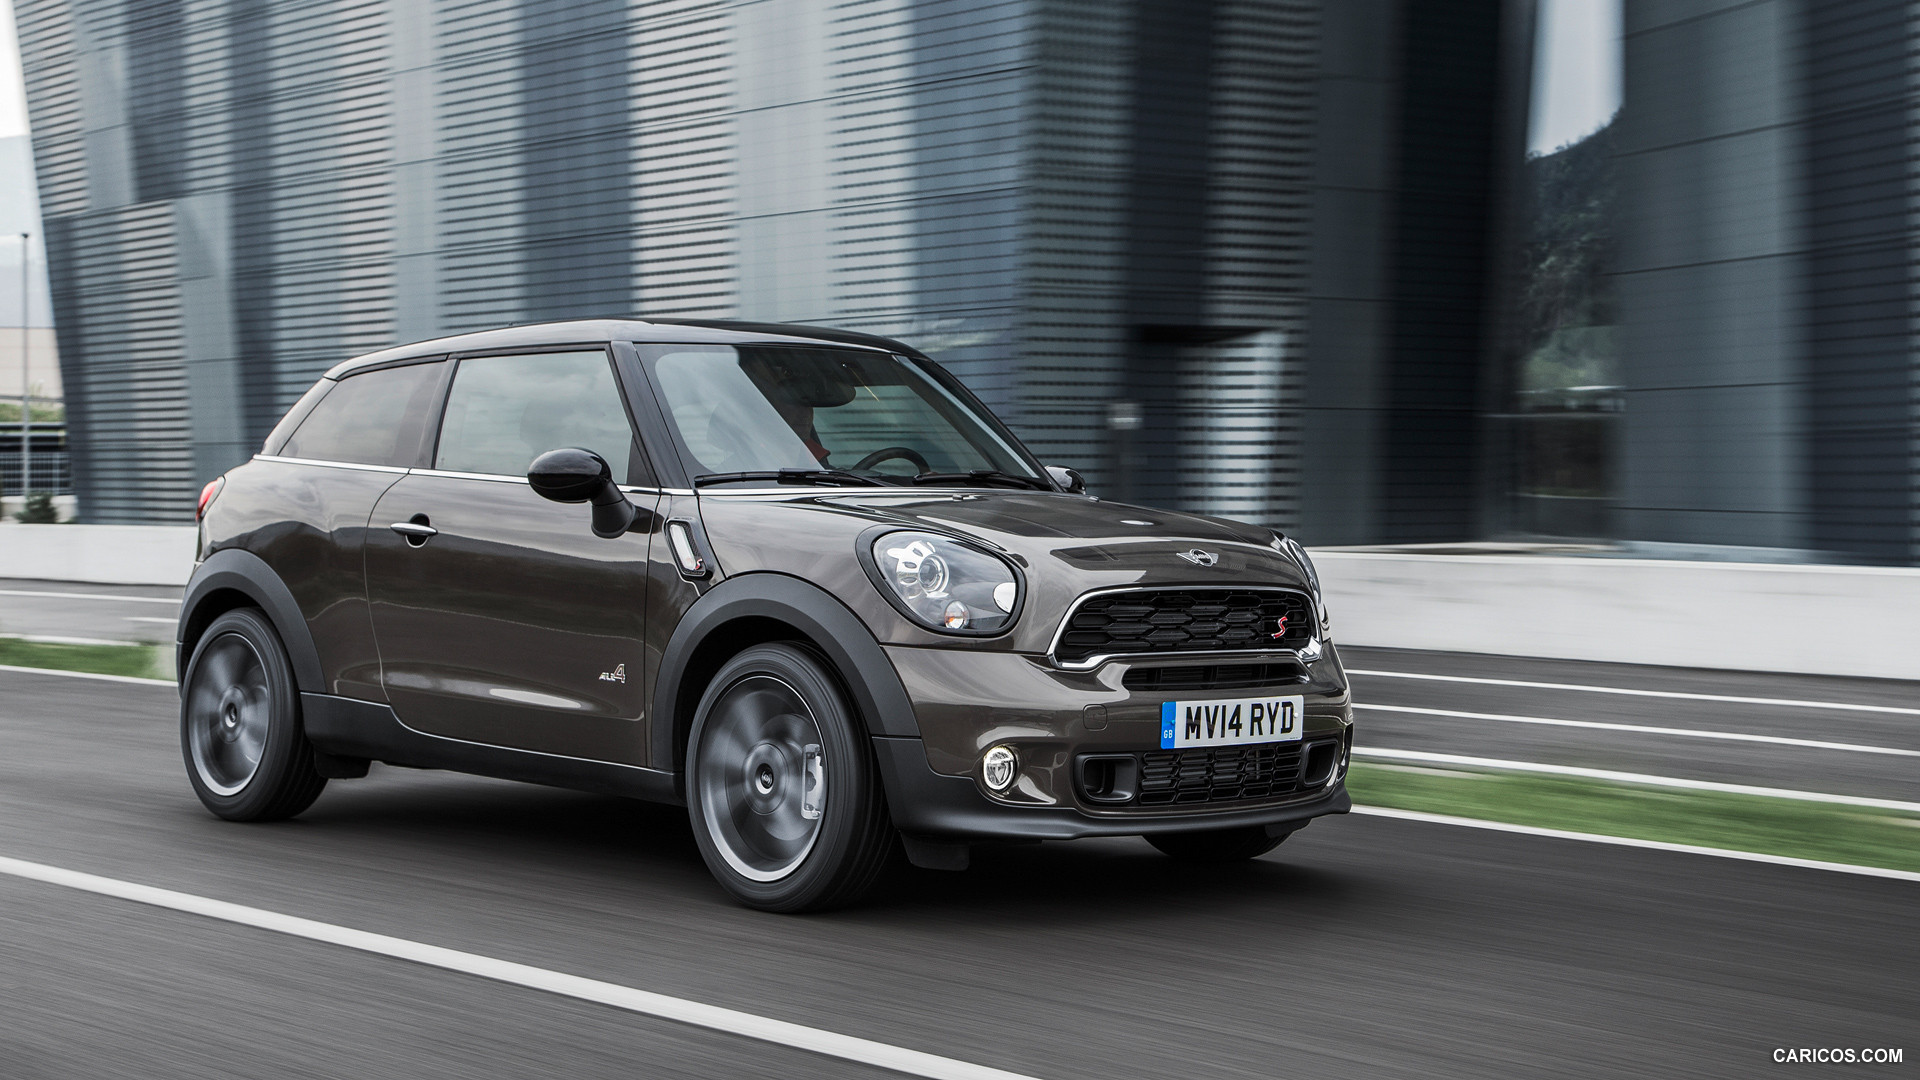 2015 MINI Paceman - Front | Caricos